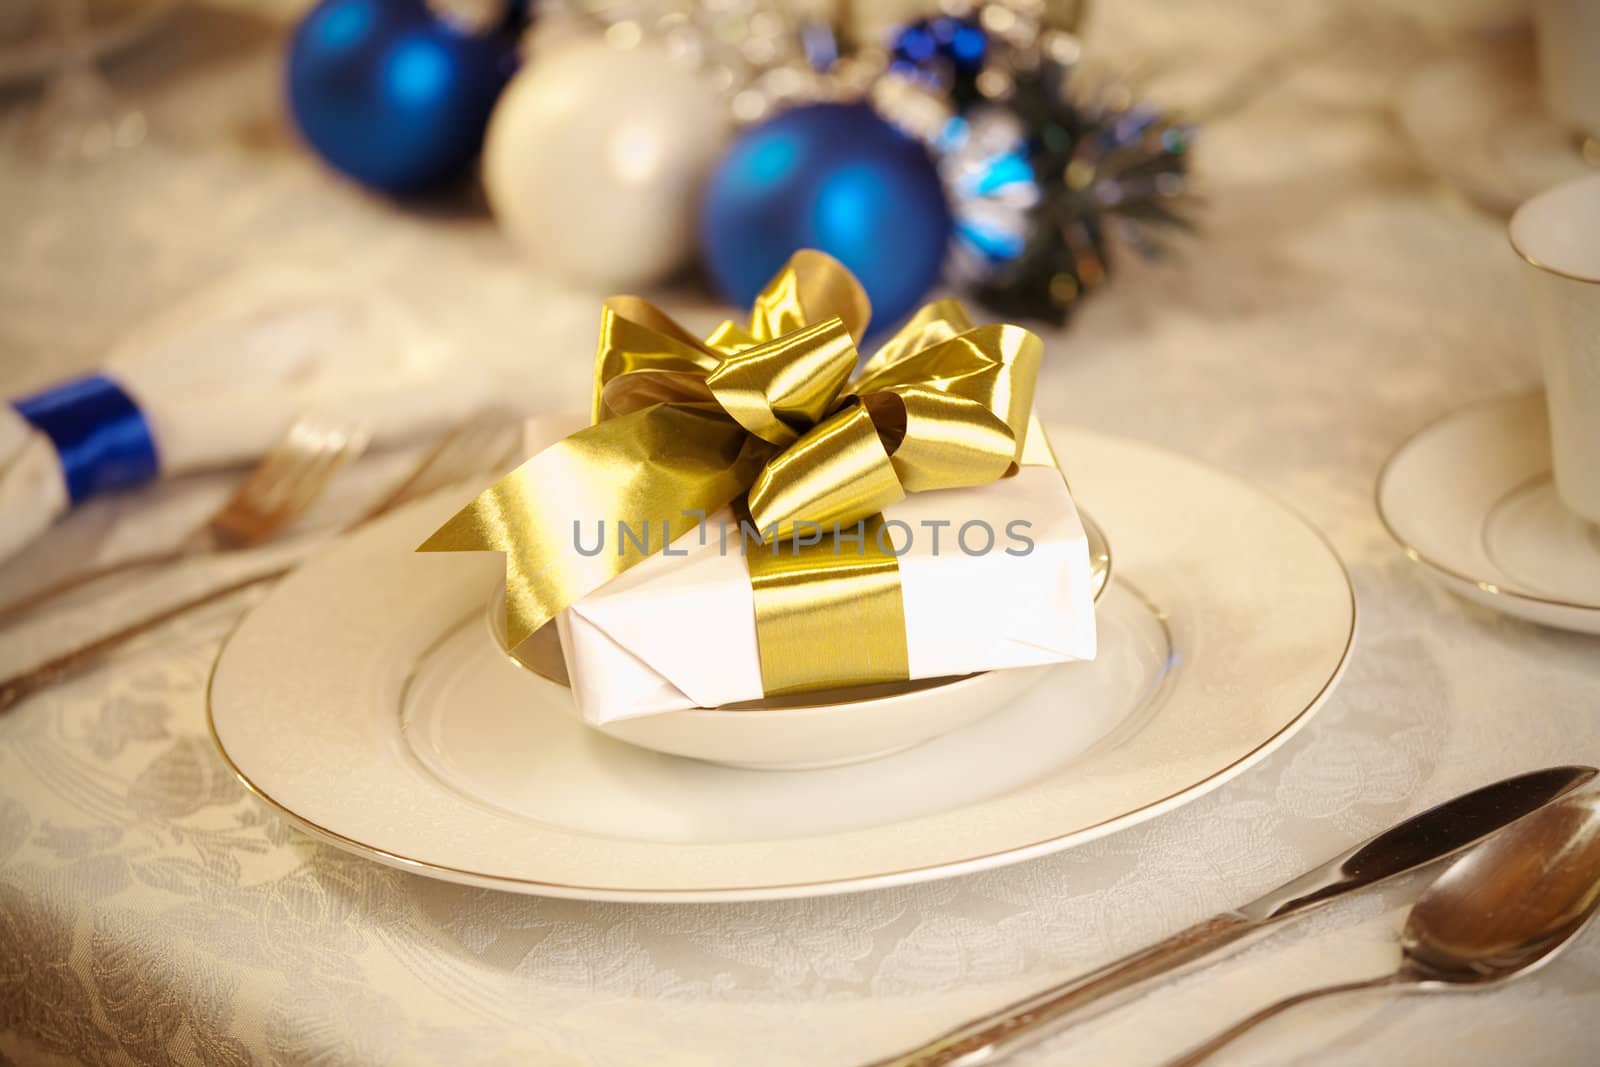 Elegant blue and white Christmas table setting with gold ribbon gift